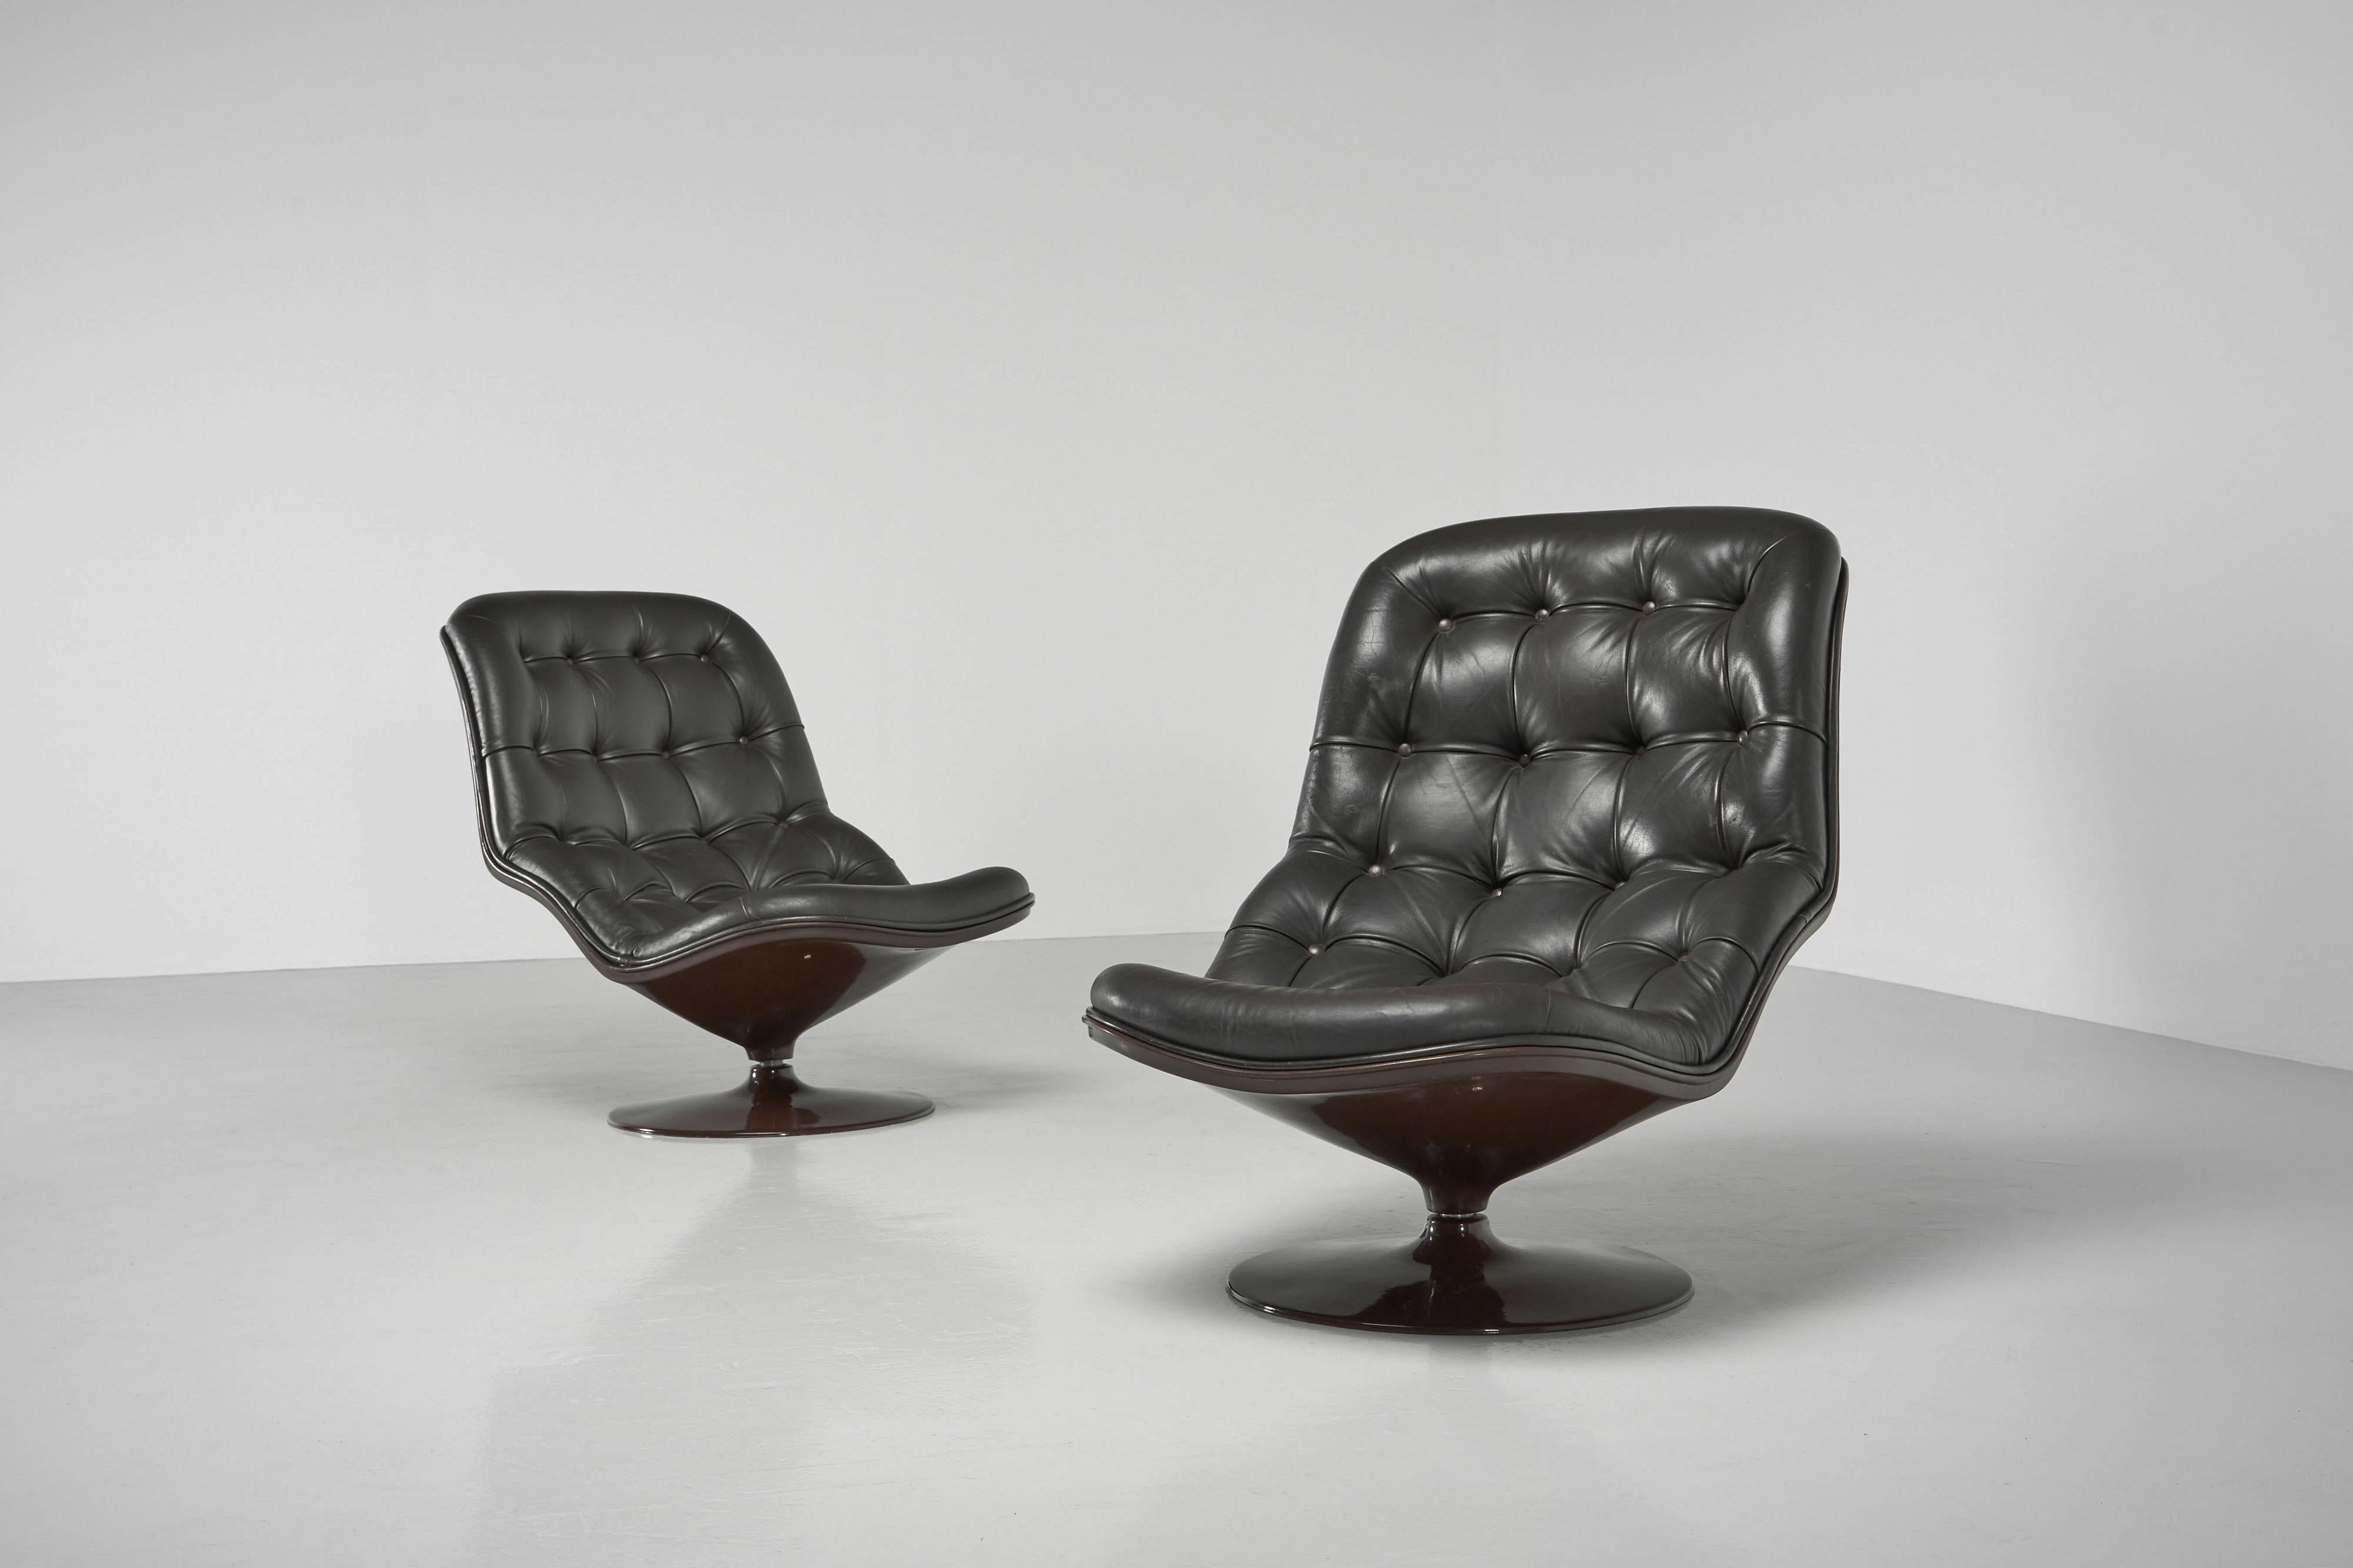 Leather Georges van Rijck Shelby lounge chairs Beaufort 1971